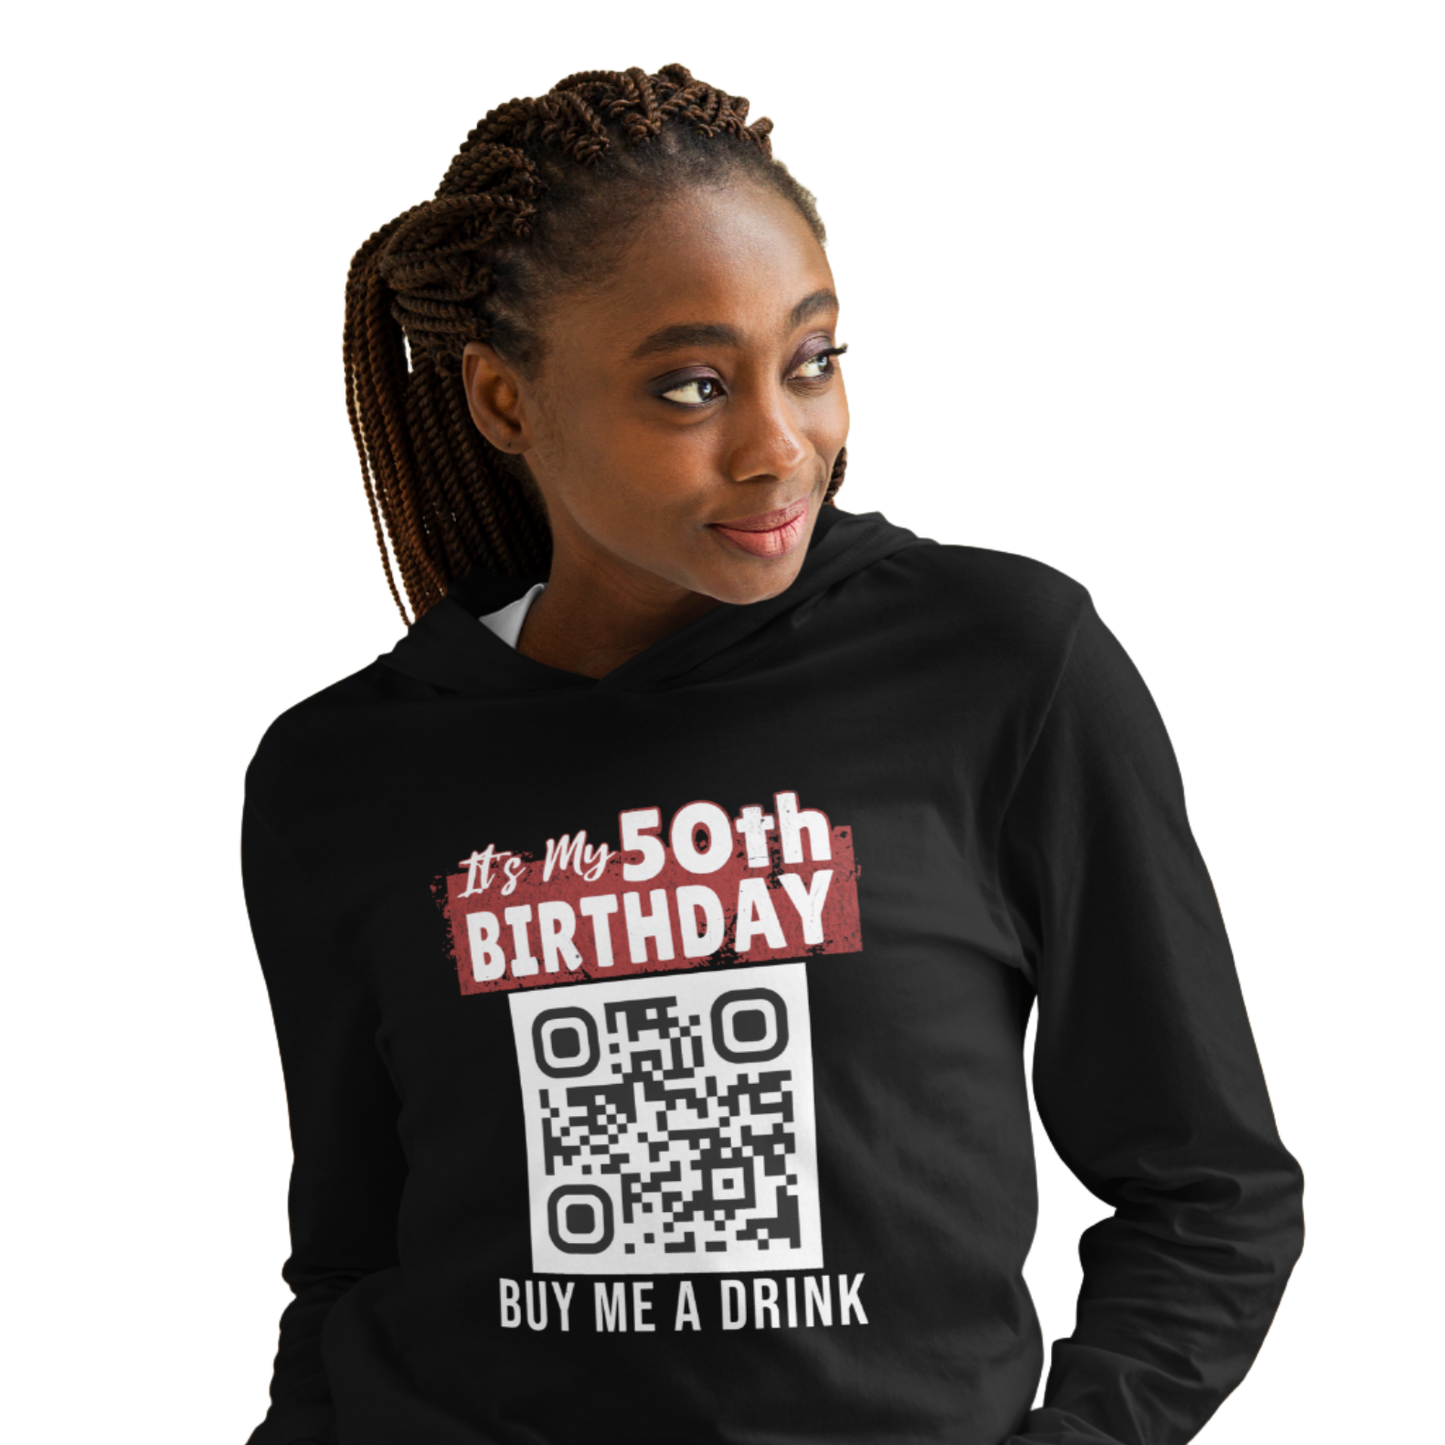 It's My 50th Birthday Buy Me A Drink Lightweight Hoodie - Personalizable